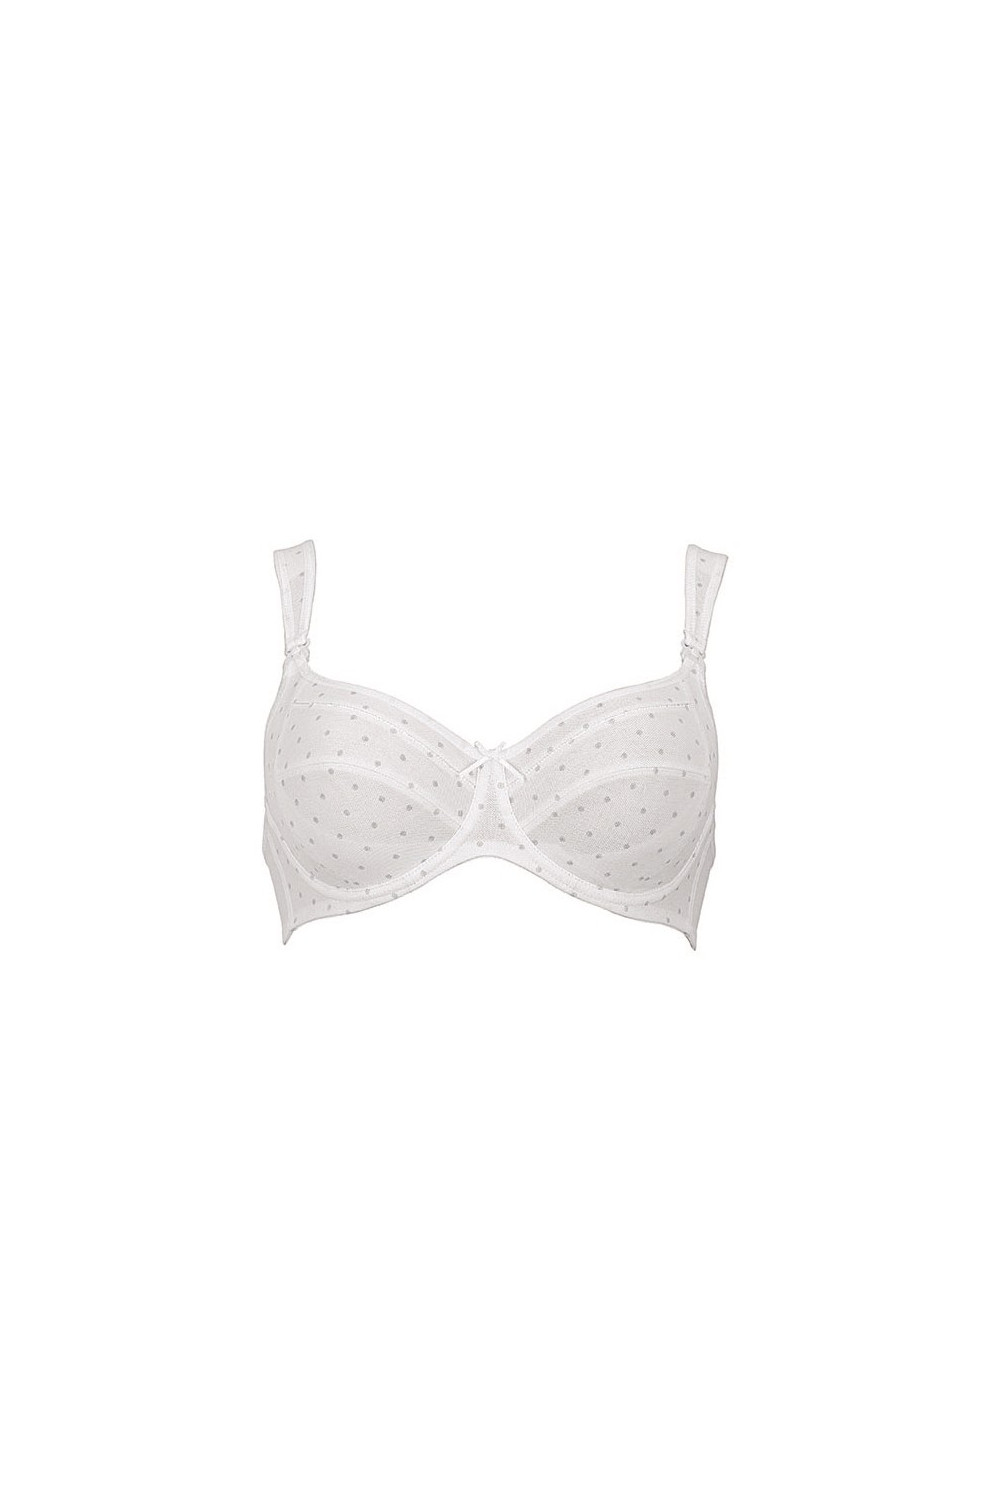 Cotton nonwired nursing bra. Deep, comfortable cups. Great support. Up to J  cup